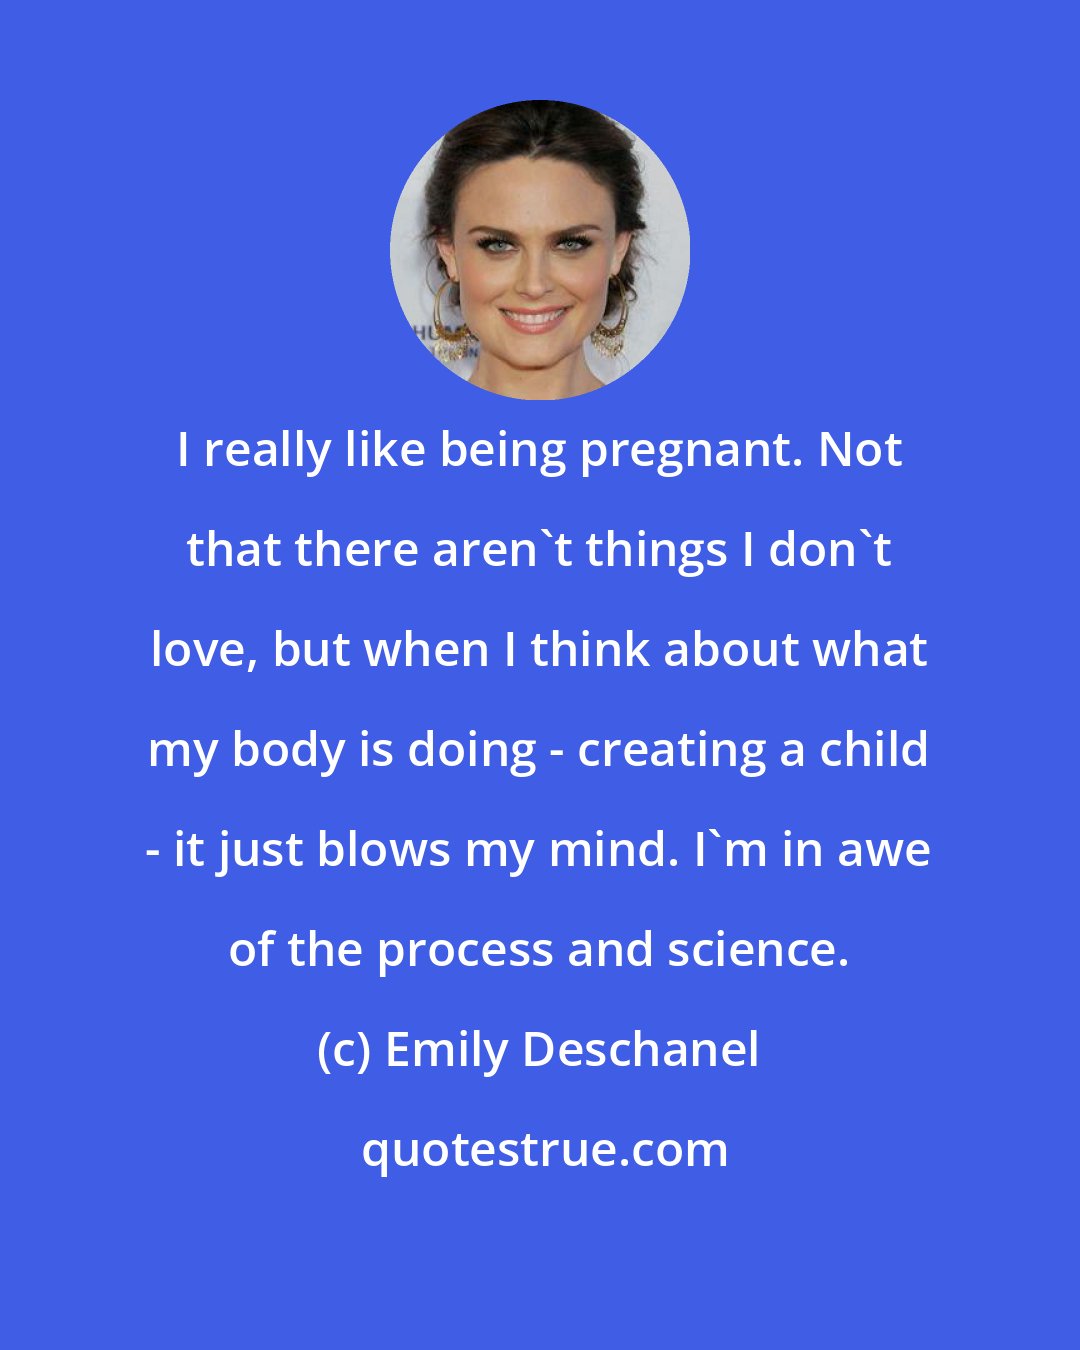 Emily Deschanel: I really like being pregnant. Not that there aren't things I don't love, but when I think about what my body is doing - creating a child - it just blows my mind. I'm in awe of the process and science.